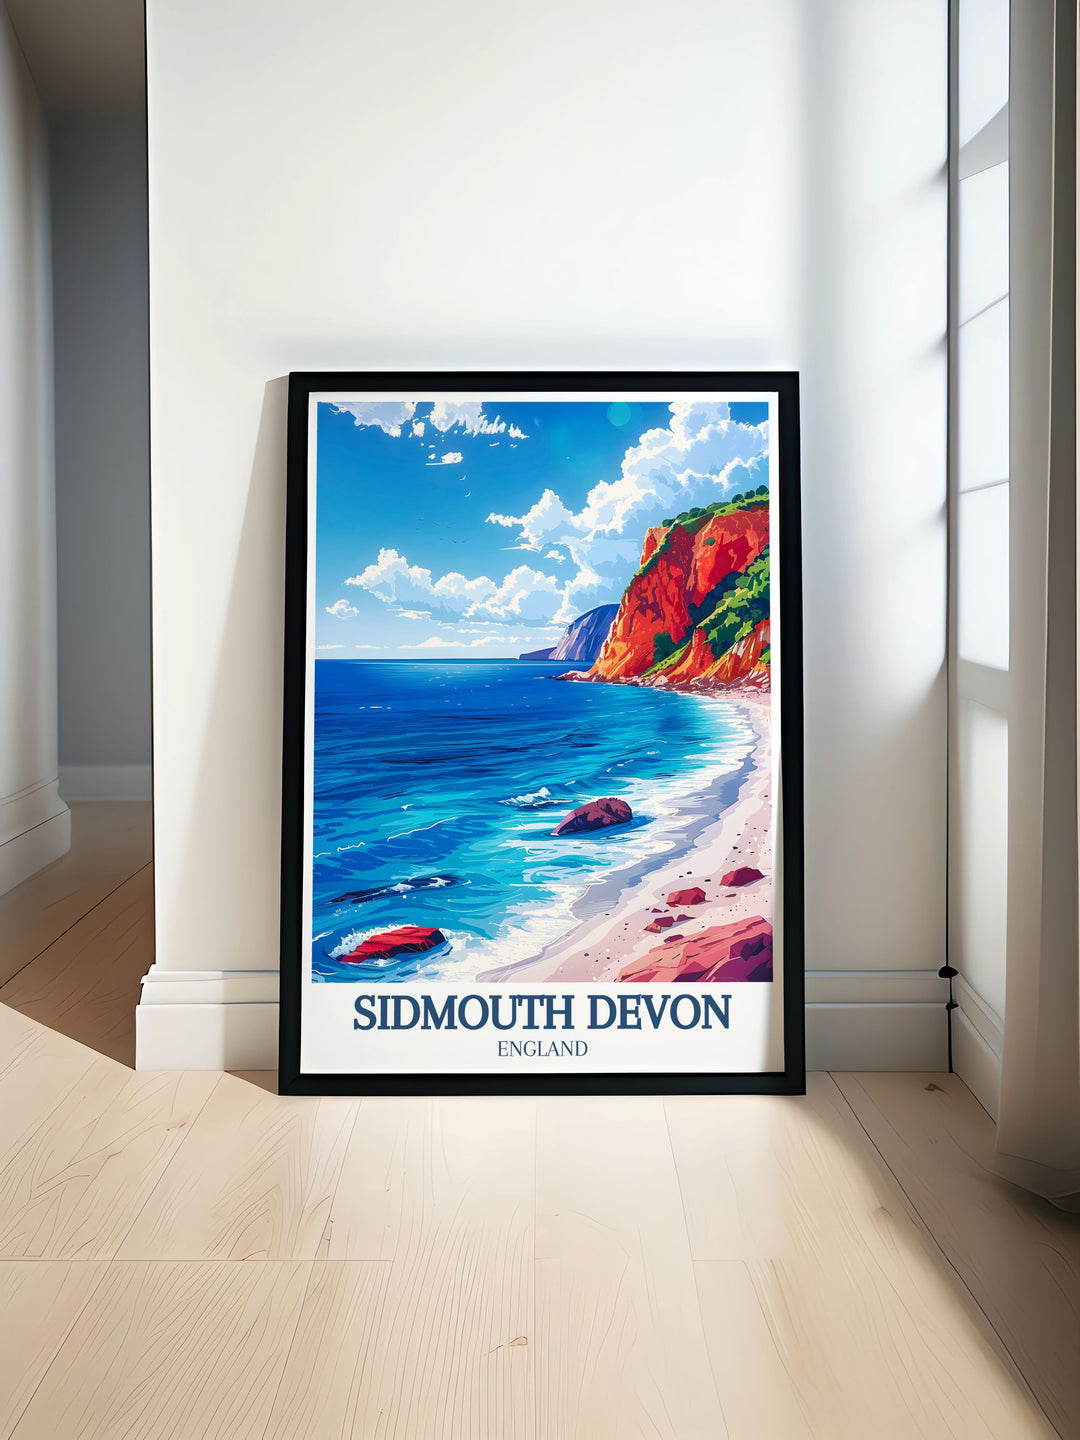 This poster of Sidmouth and the Jurassic Cliffs captures the breathtaking coastal scenery and rich history of Devon, inviting viewers to explore the picturesque landscapes and seaside charm.